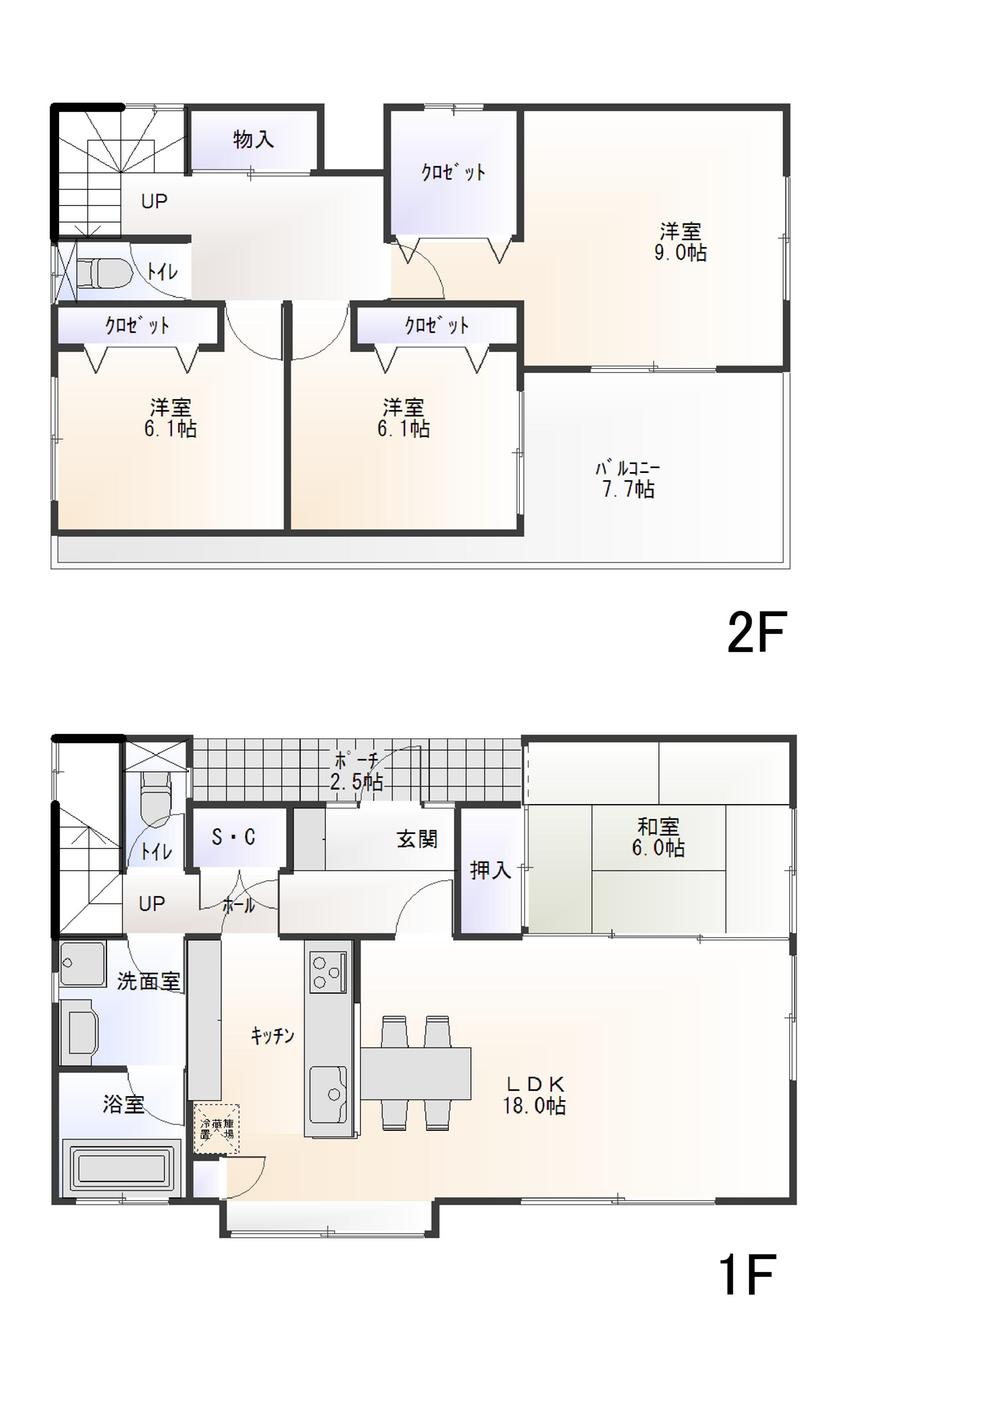 Other building plan example. Building reference price 18 million yen